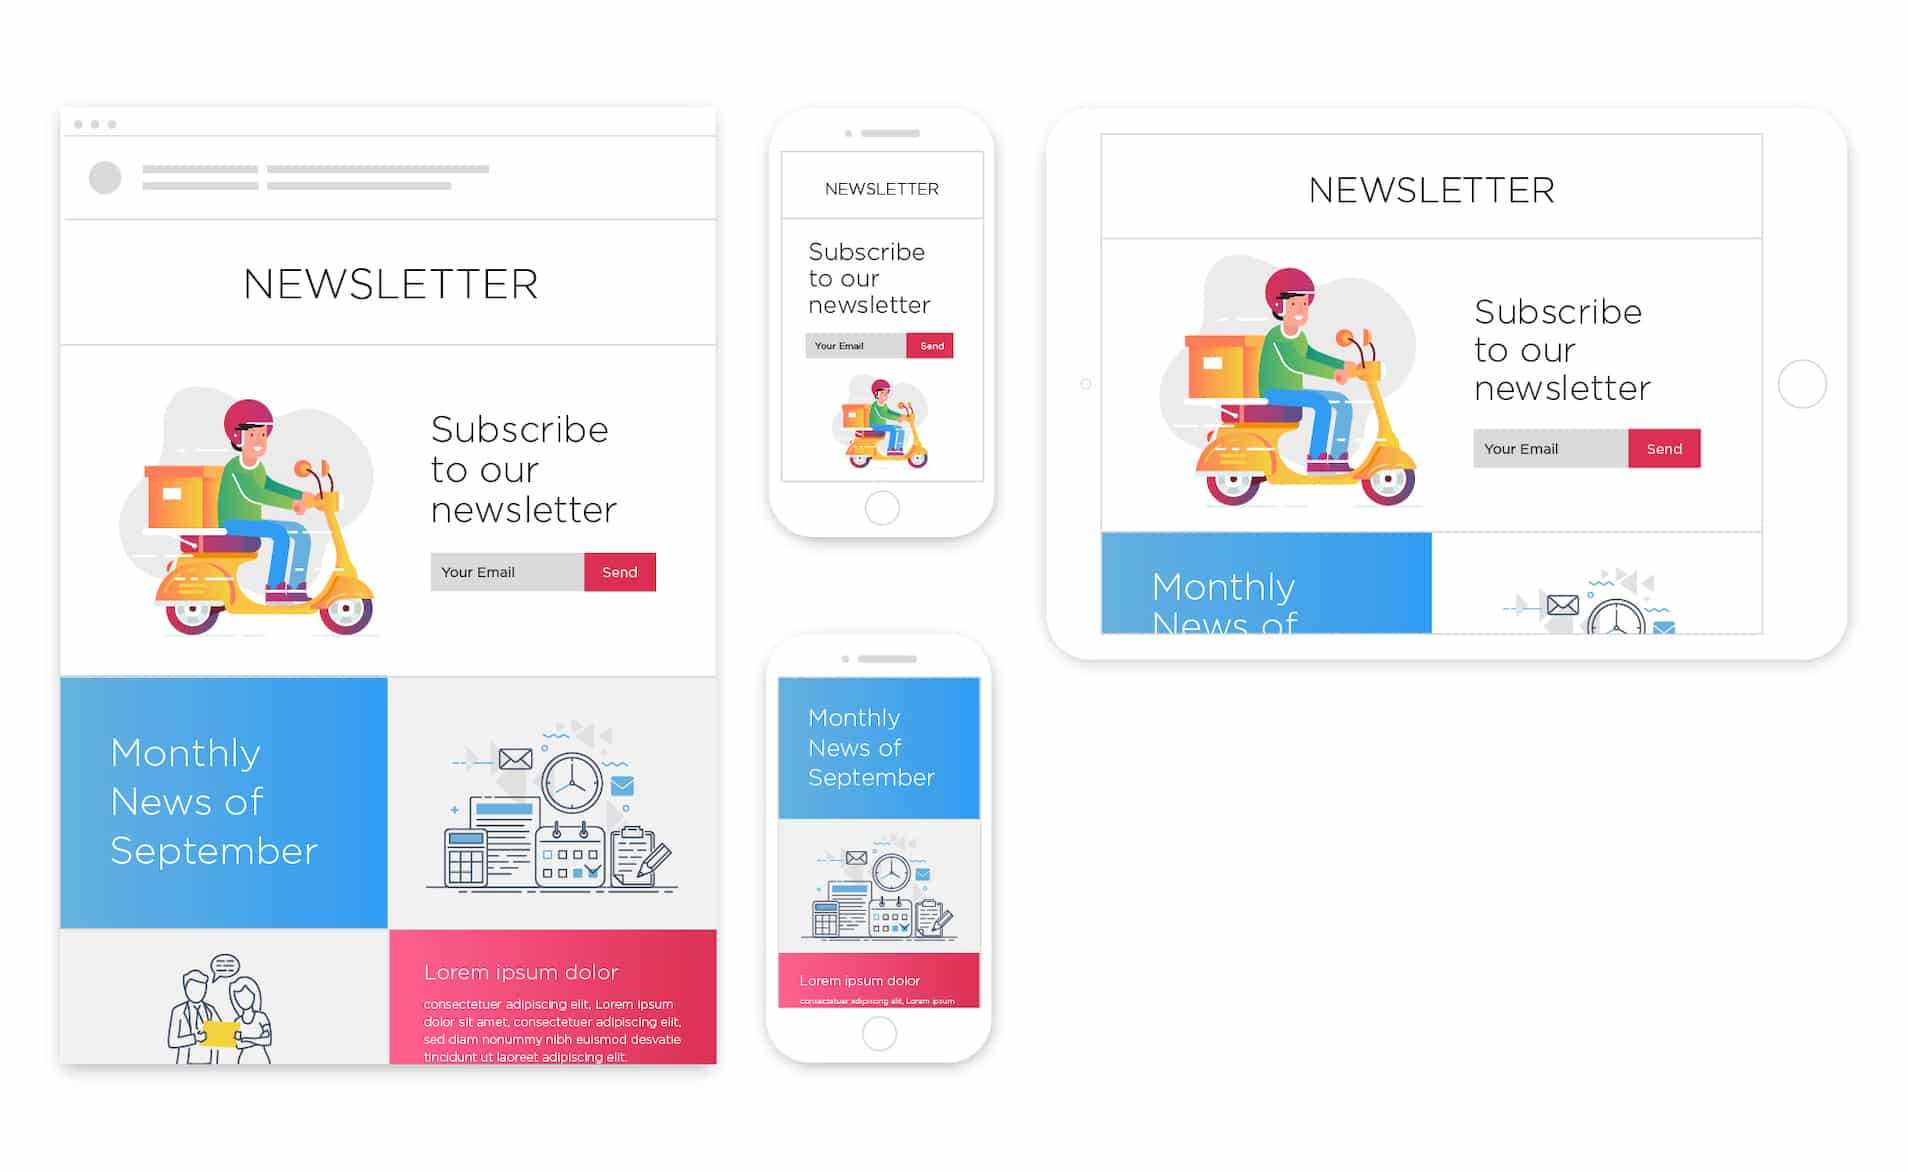 Examples of ContactMonkey's responsive email templates, which work across all devices.